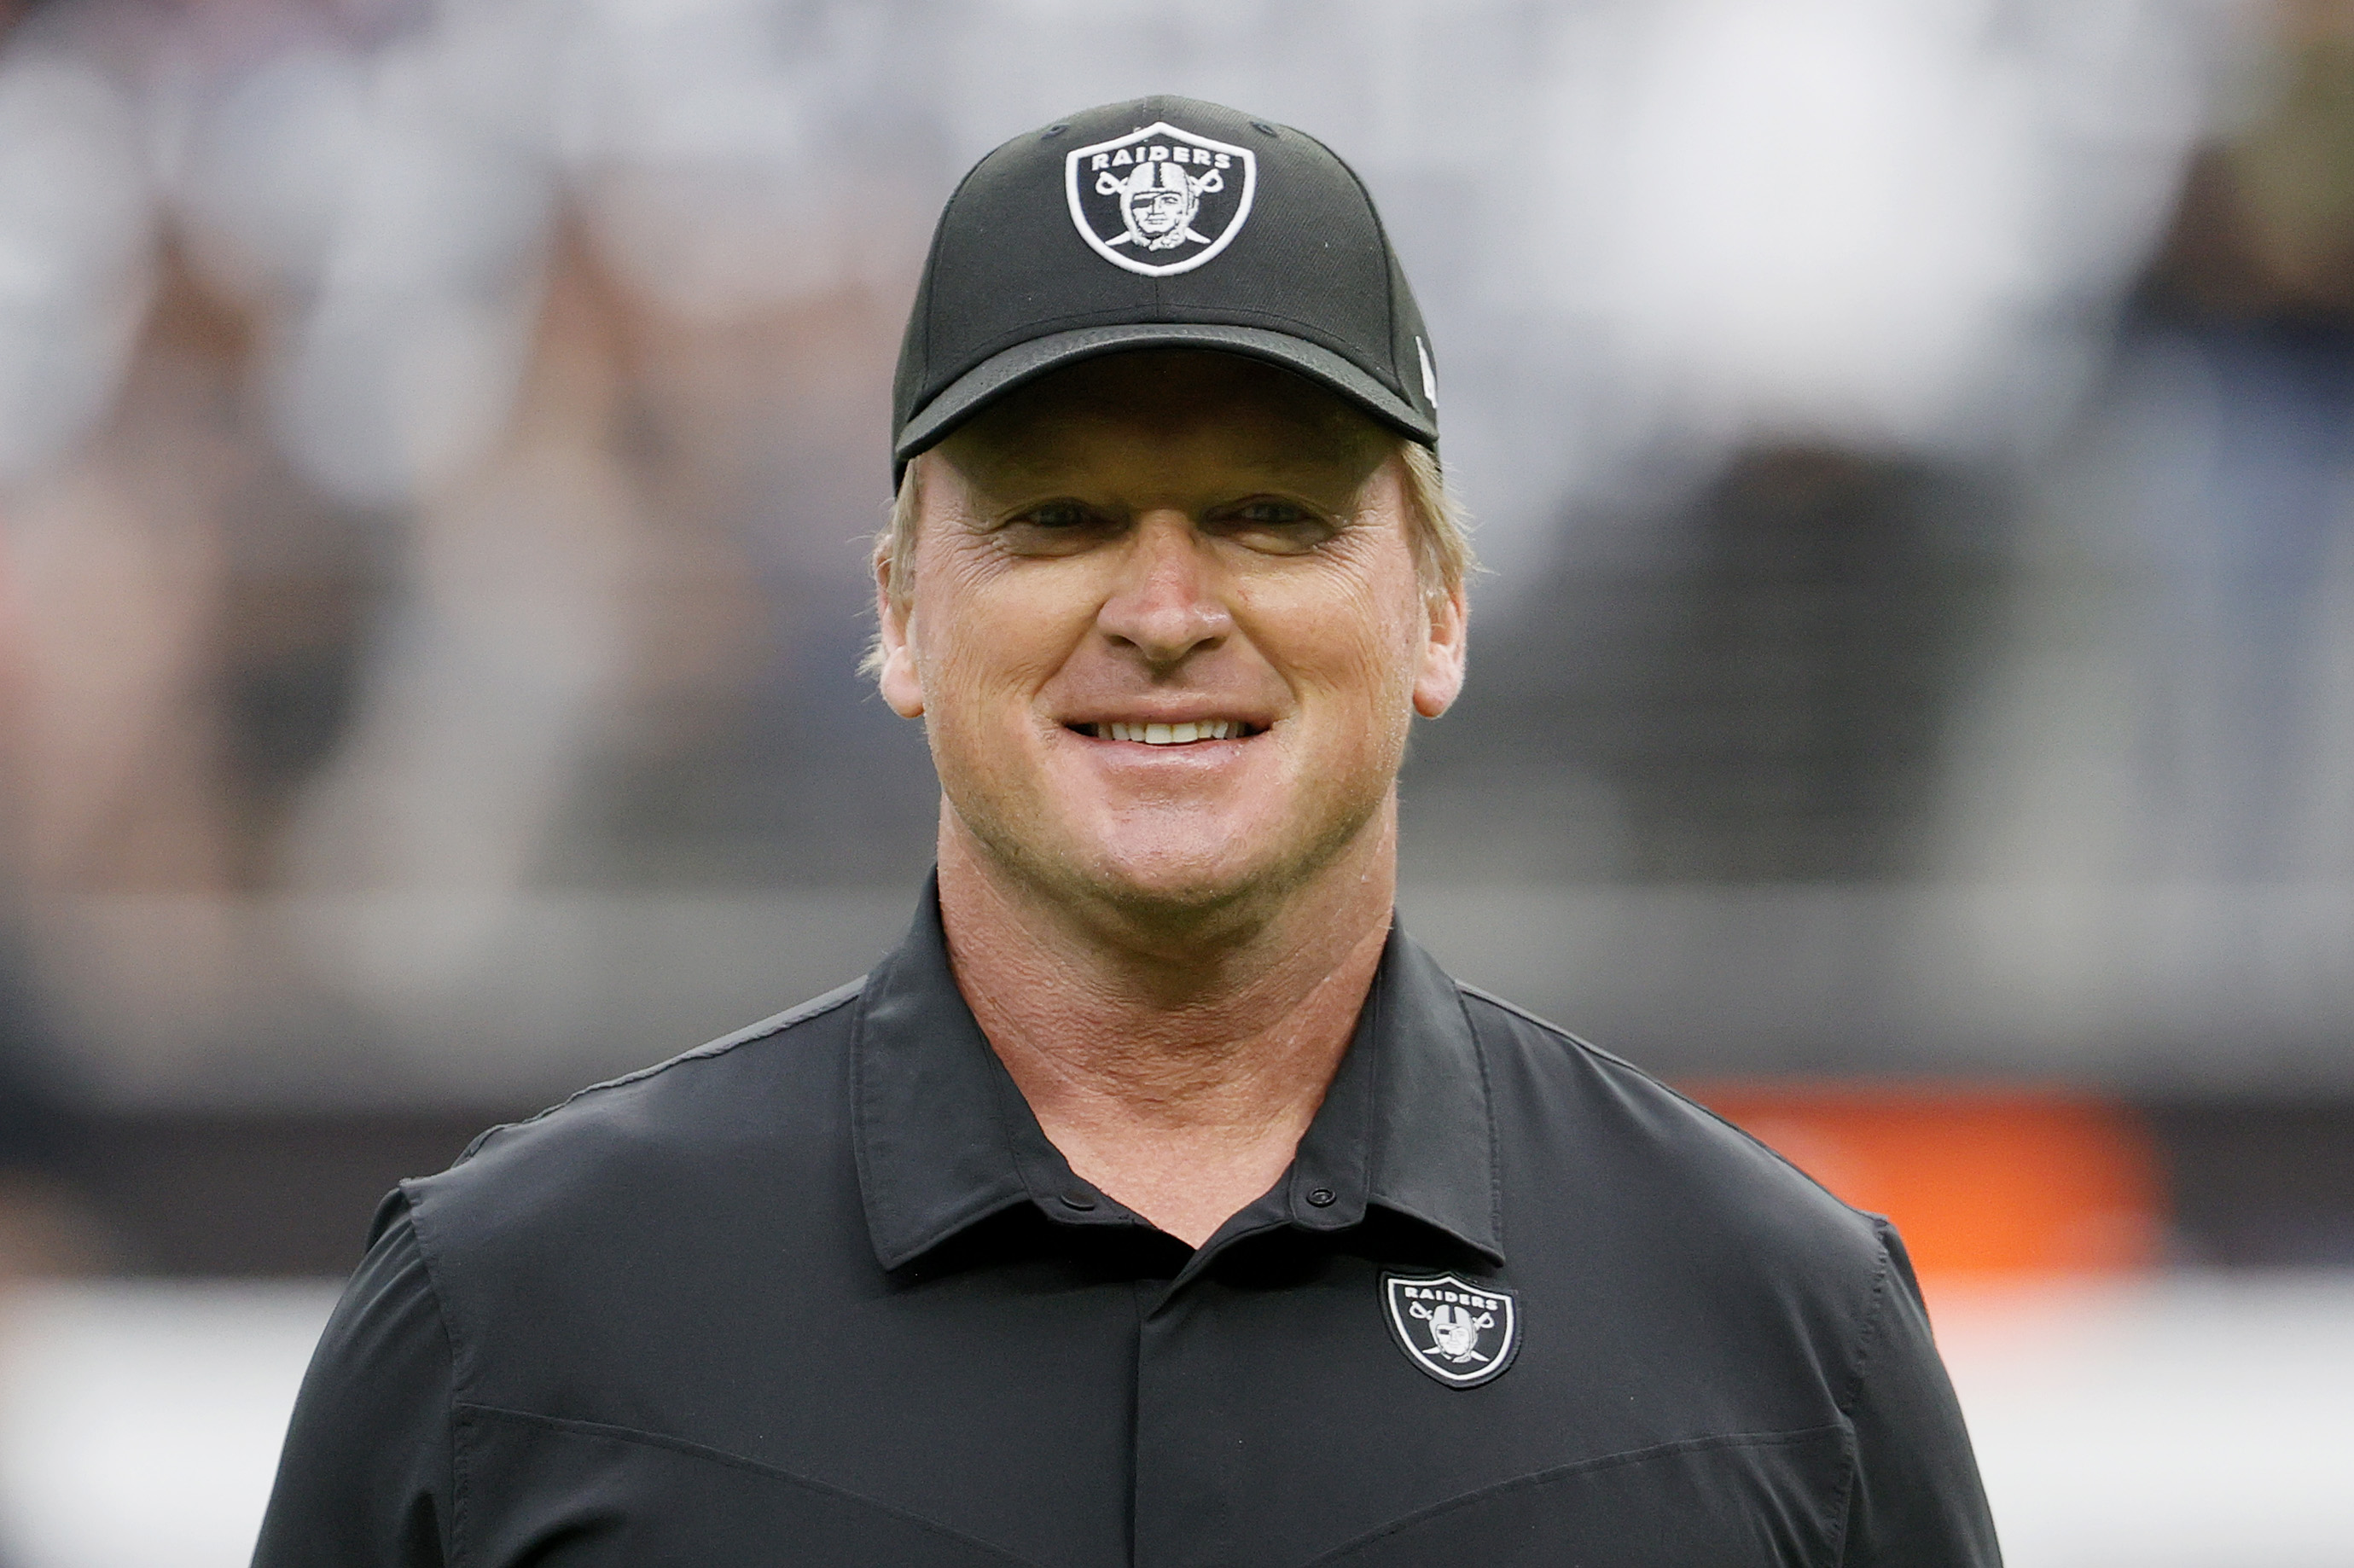 What Did Jon Gruden Say? Raiders Coach Resigns Over Offensive Emails